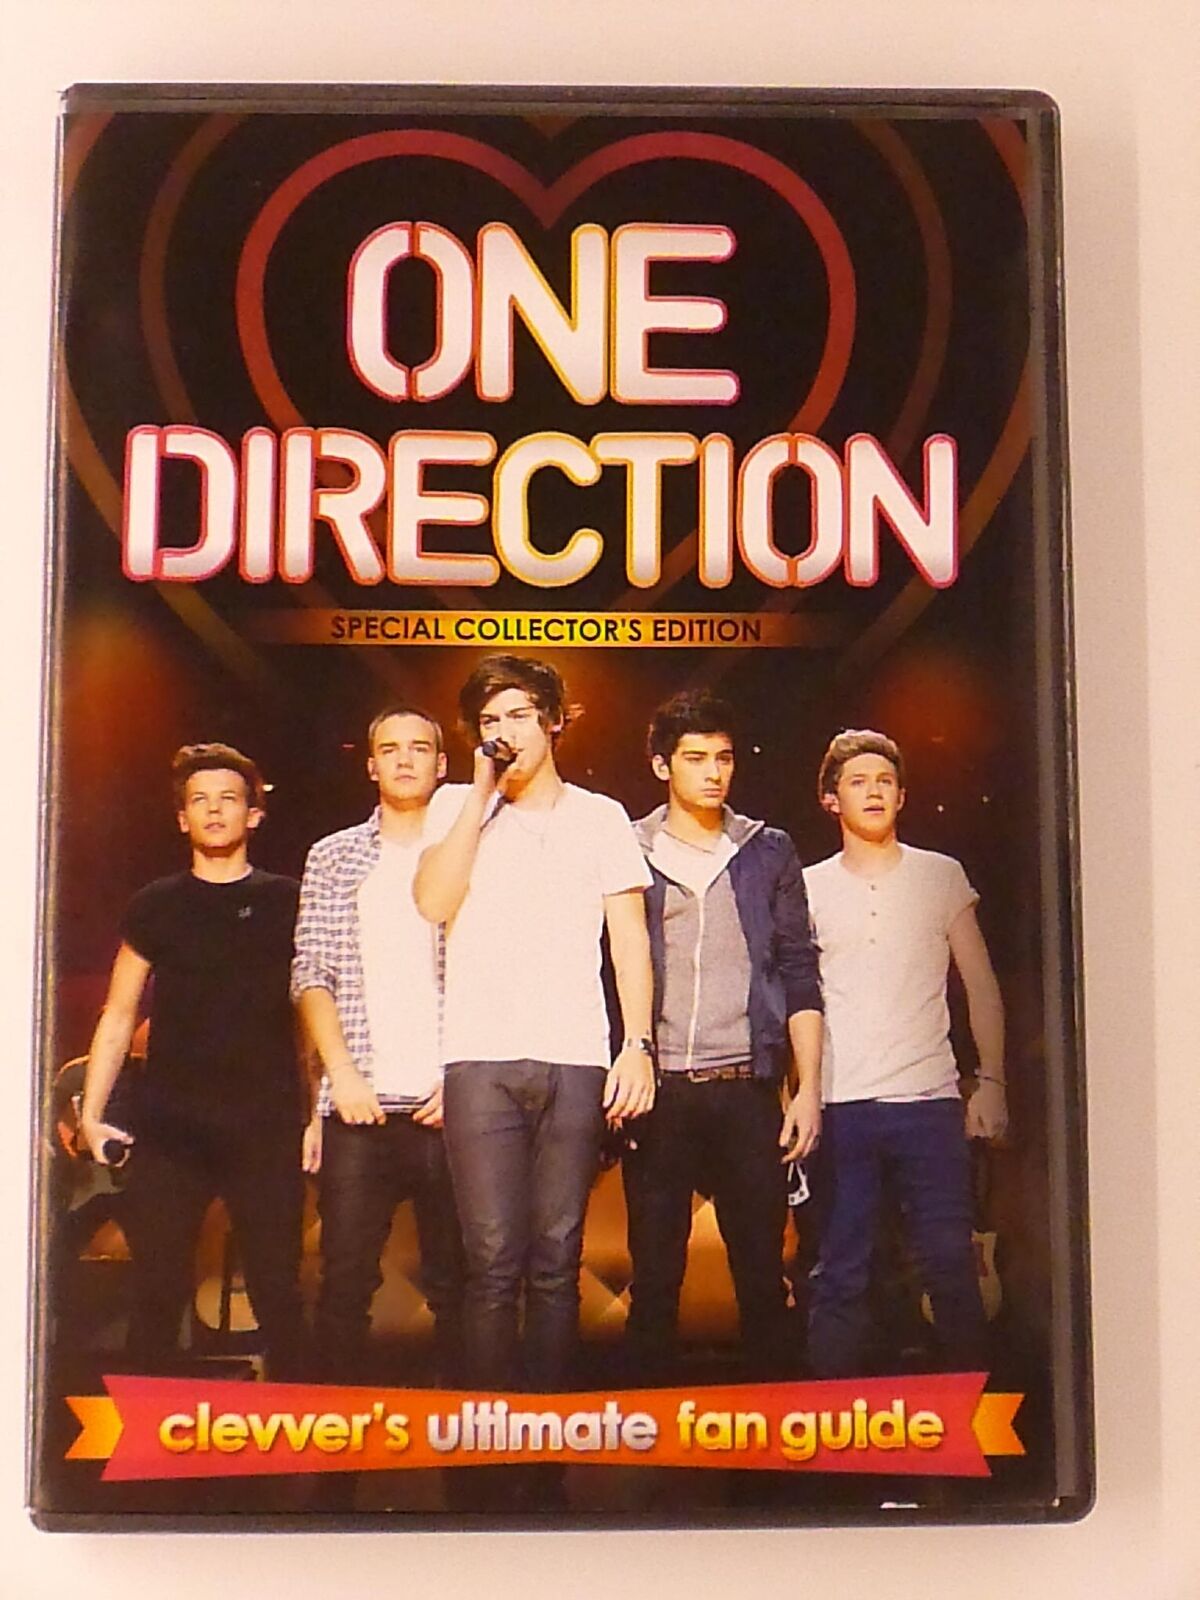 One Direction - Clevvers ultimate fan guide (DVD, special collectors ed. - I0123